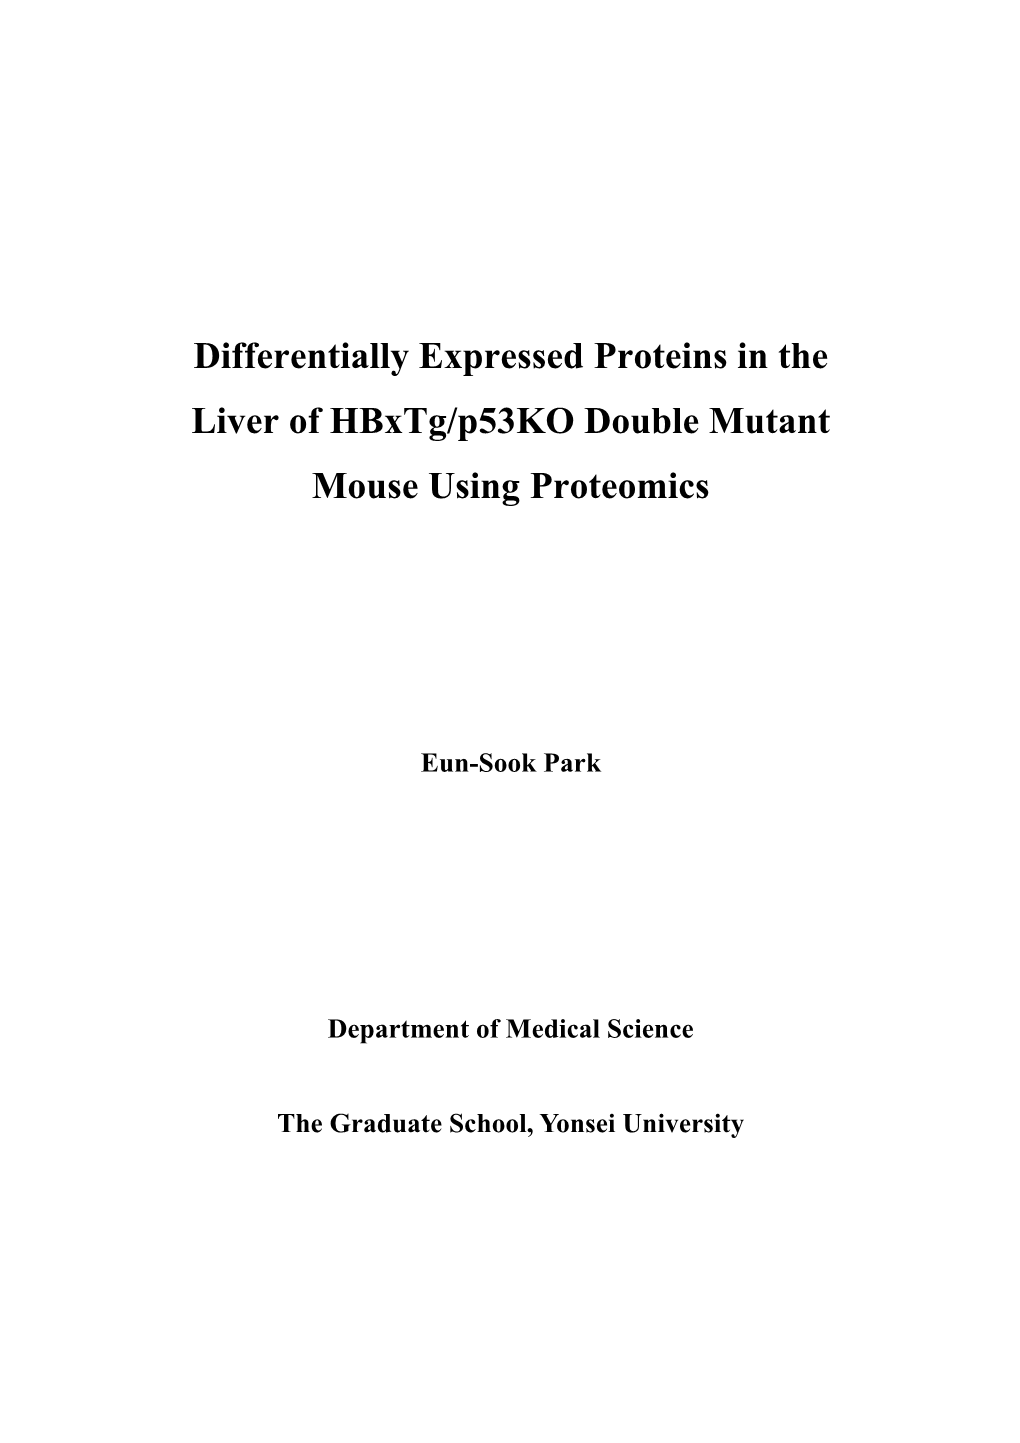 Differentially Expressed Proteins in the Liver of Hbxtg/P53ko Double Mutant Mouse Using Proteomics